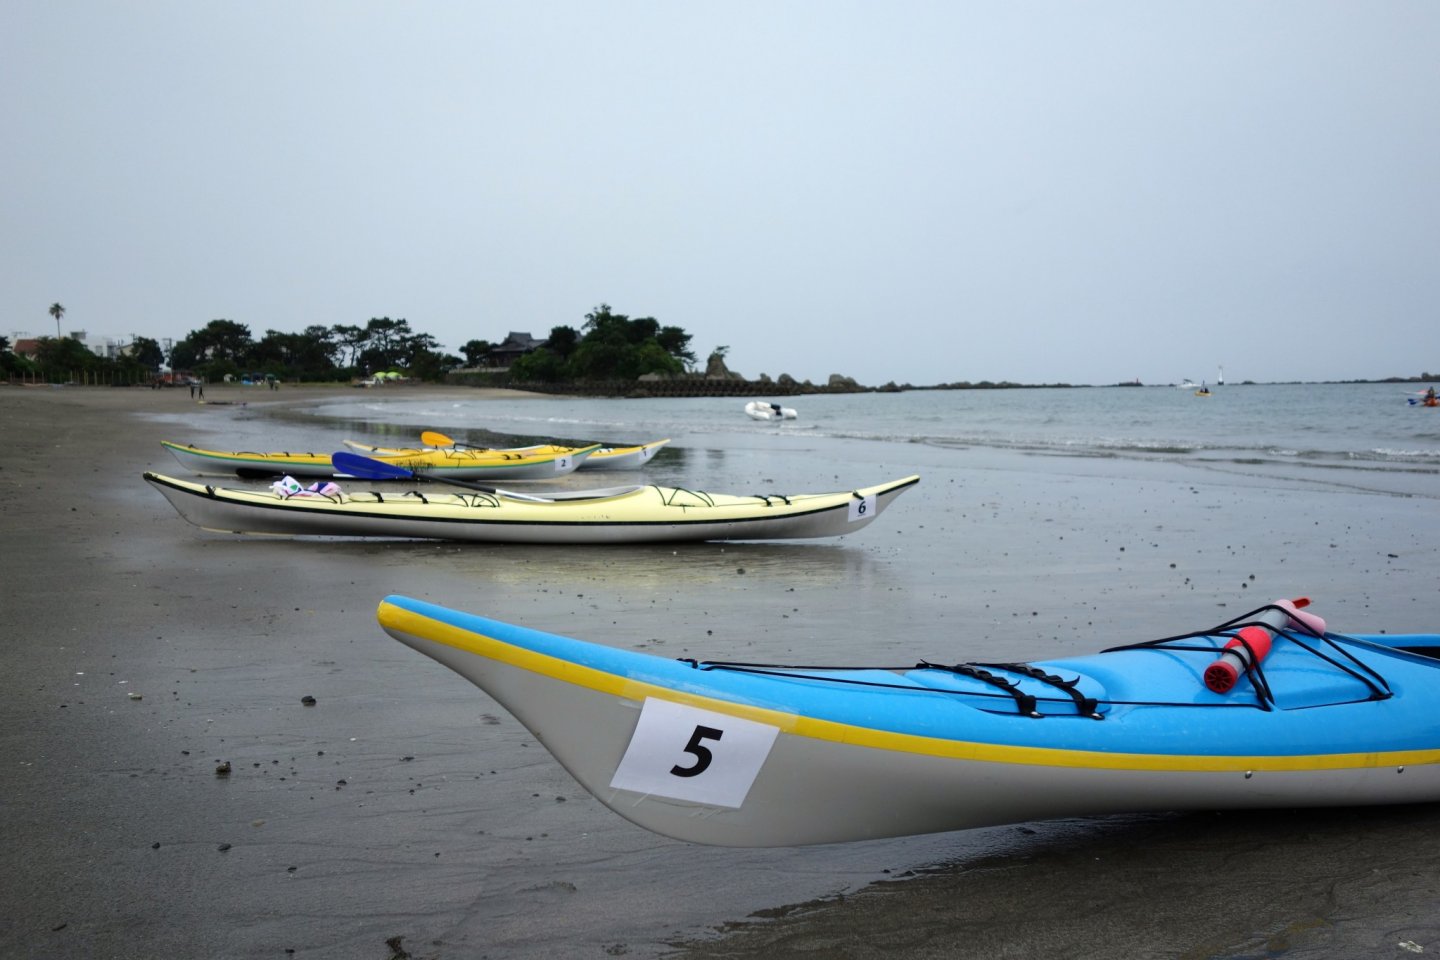 Kayak\'s line up on the beach, with team\'s race numbers stuck on the side